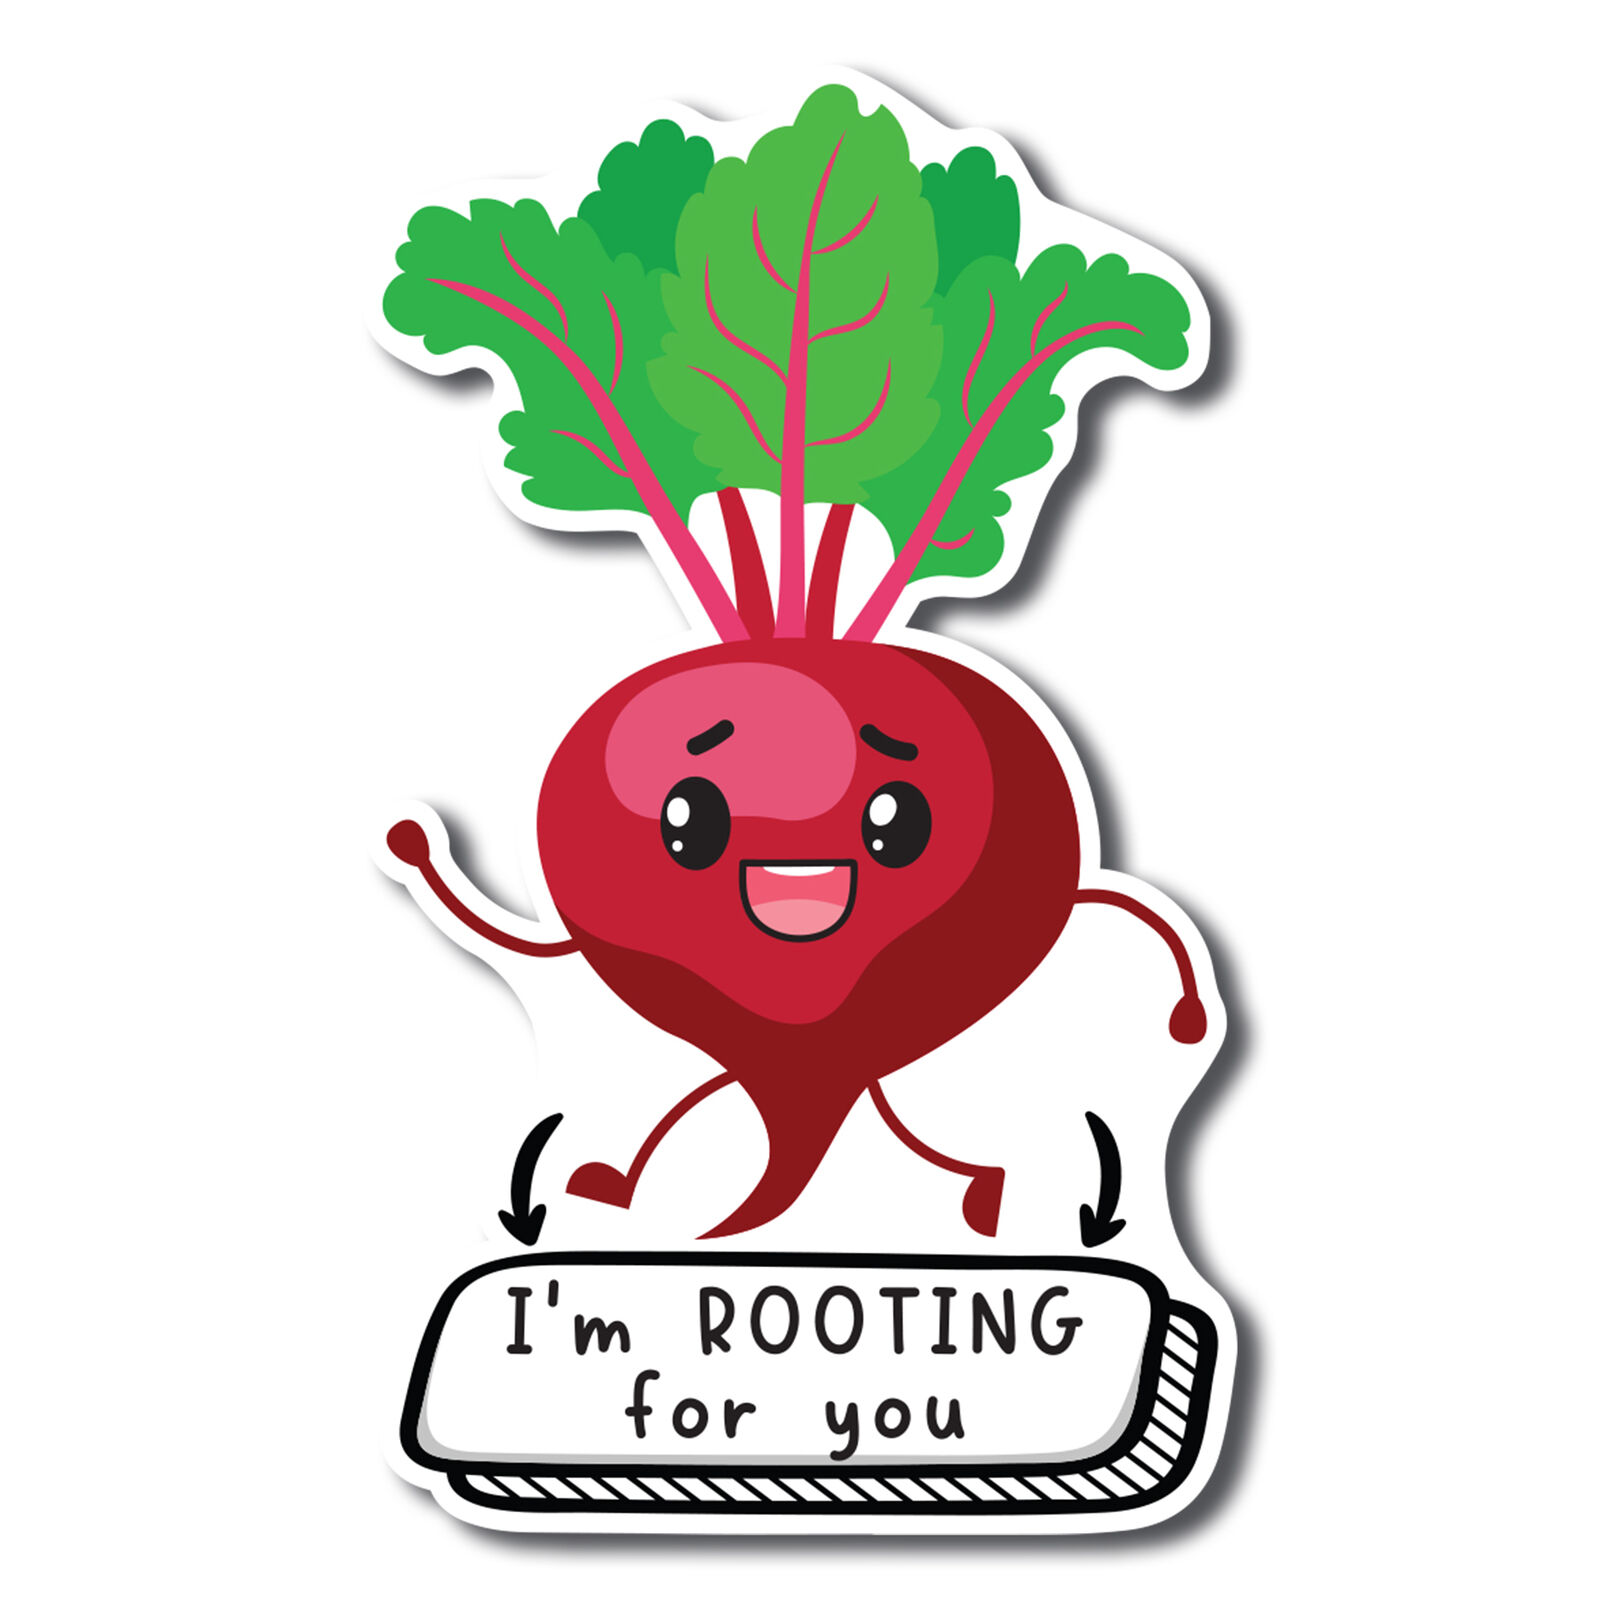 I'm Rooting For You Cute Funny Plant Succulent Magnet Decal, 5 inches